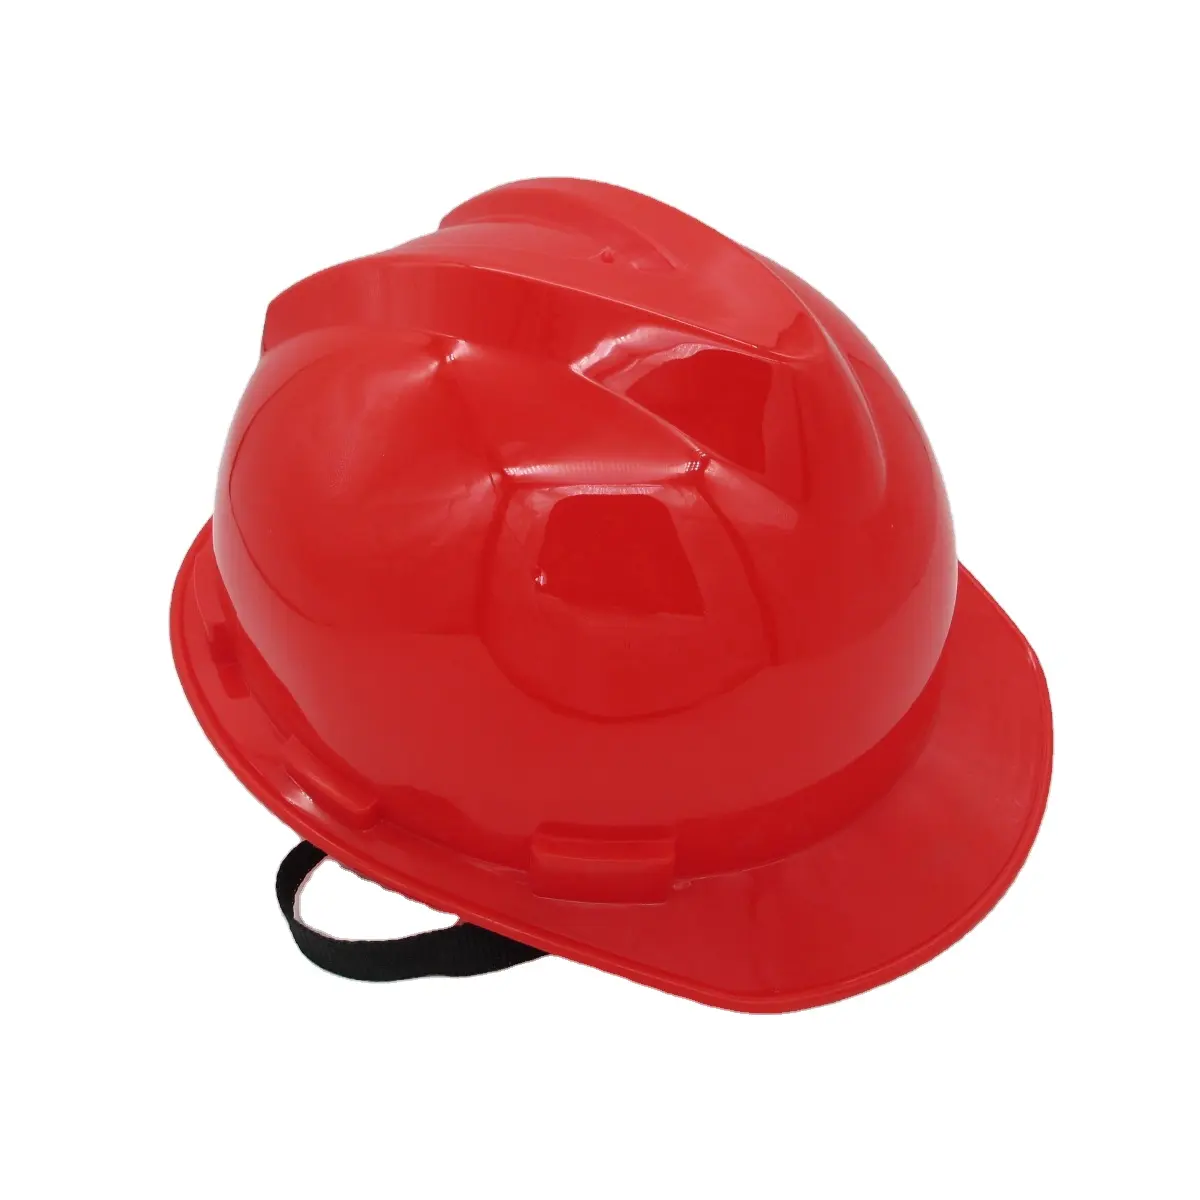 hard hats construction safety helmet weight,head protection safety helmet white